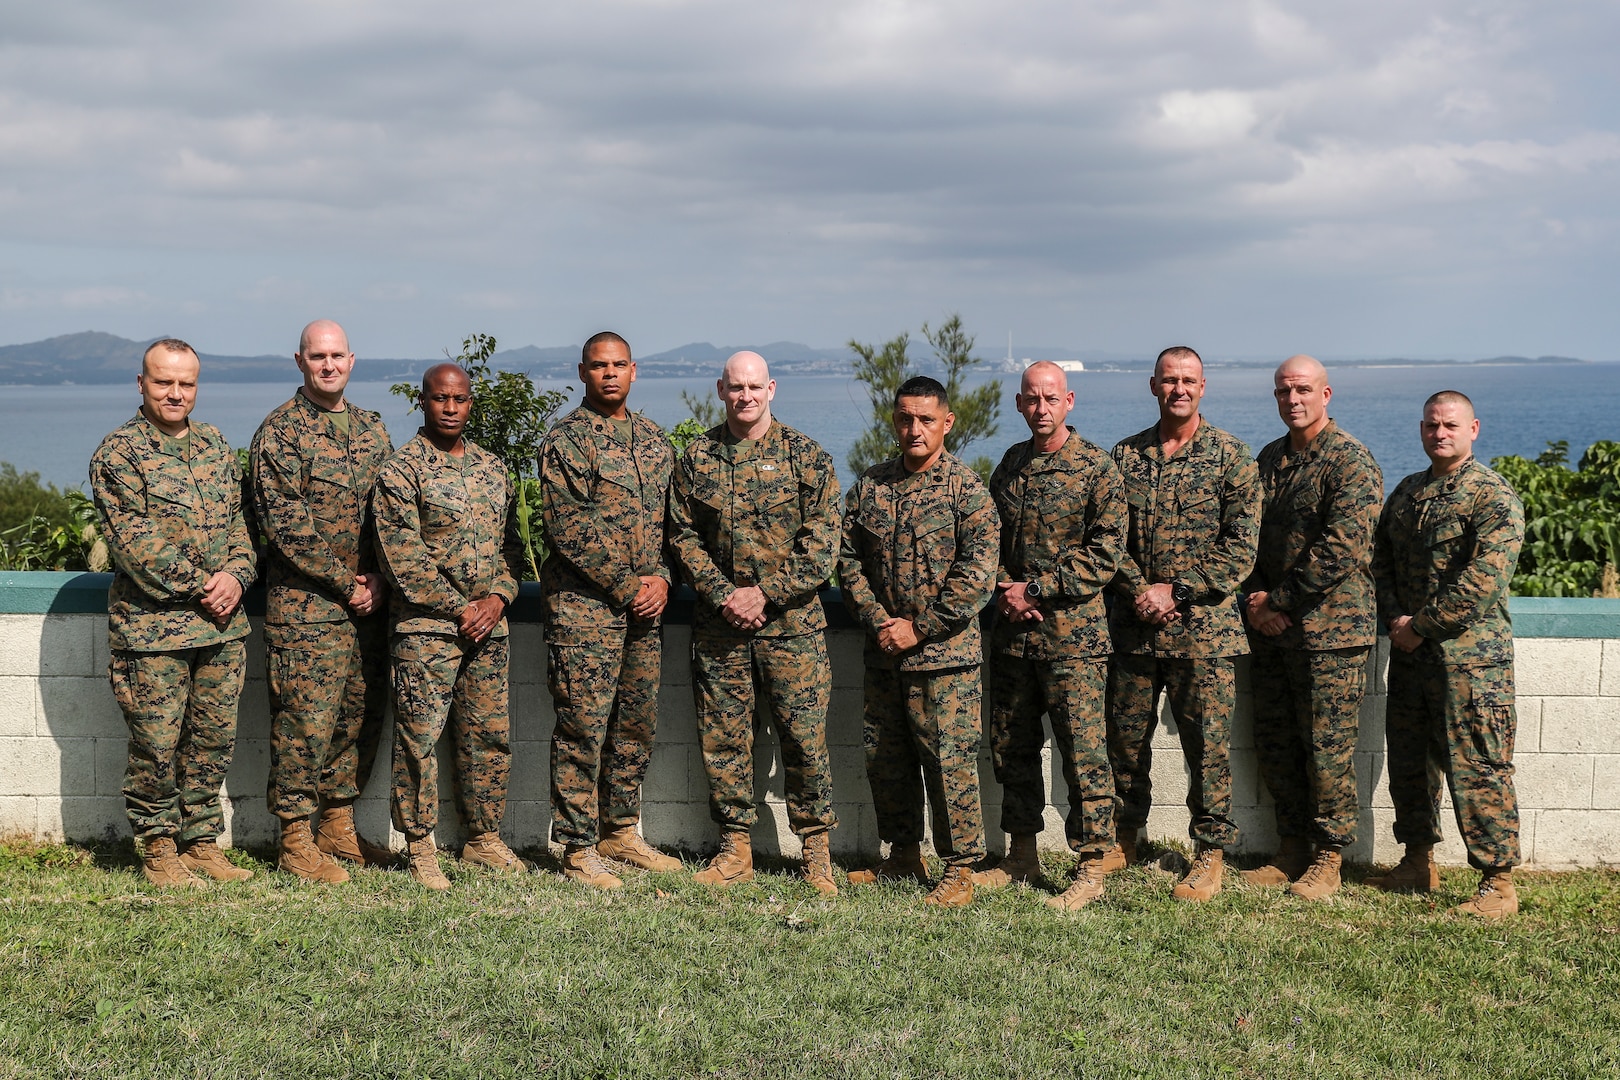 Sergeant Major of the Marine Corps Conducts Force Level Summit 2020